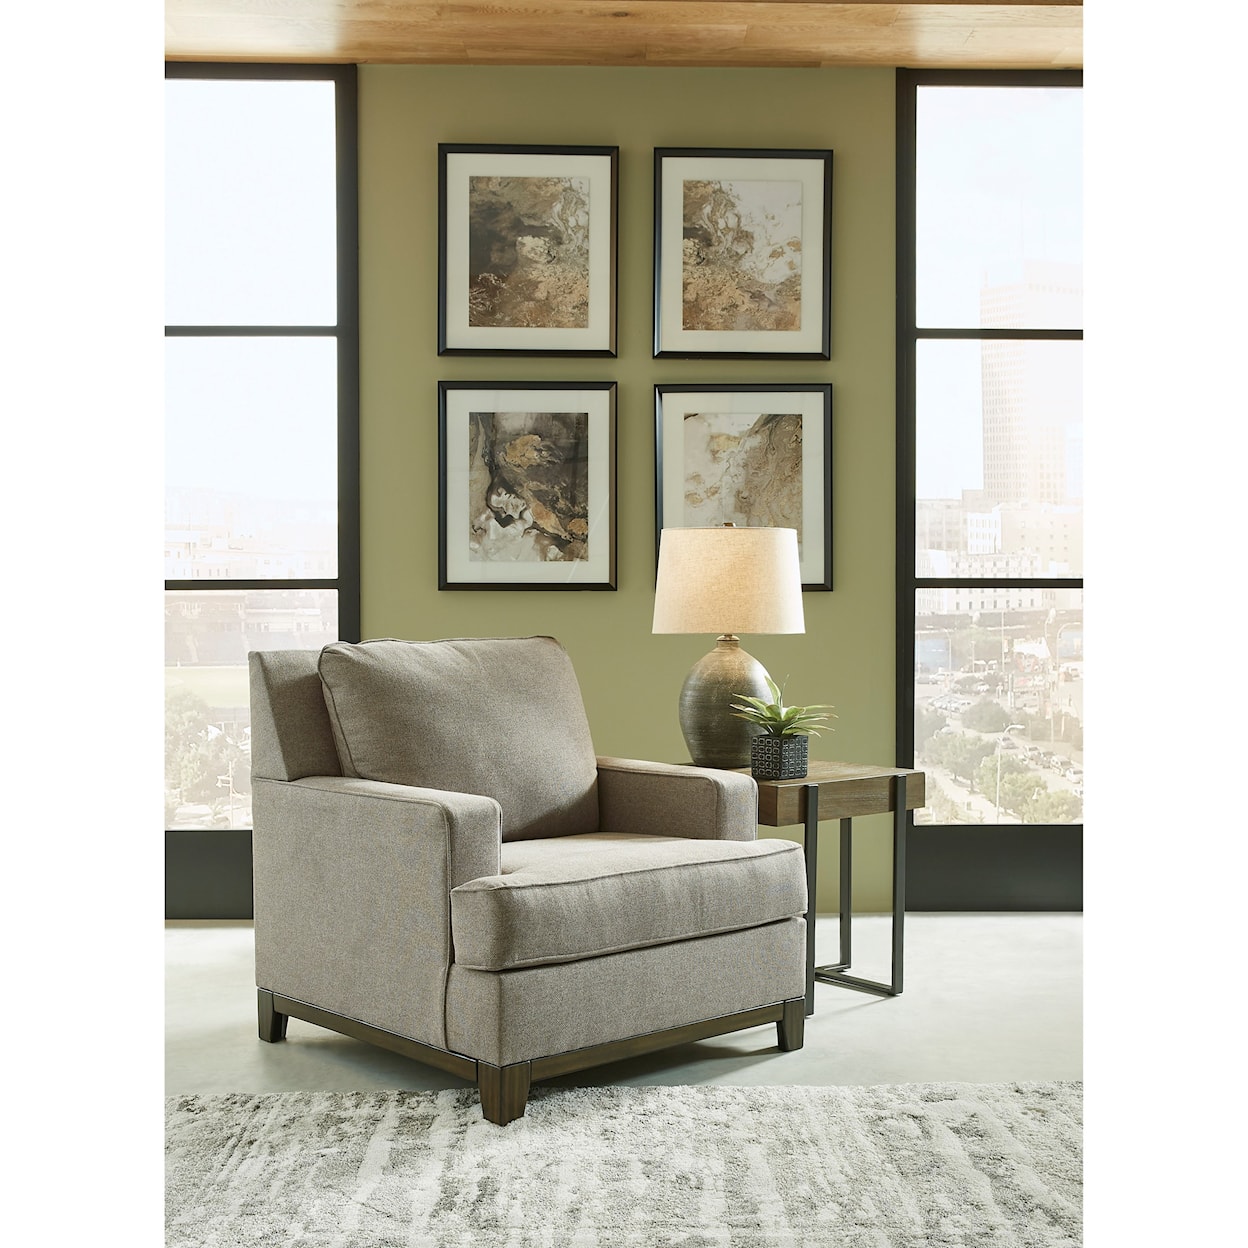 Signature Design by Ashley Furniture Kaywood Chair and Ottoman